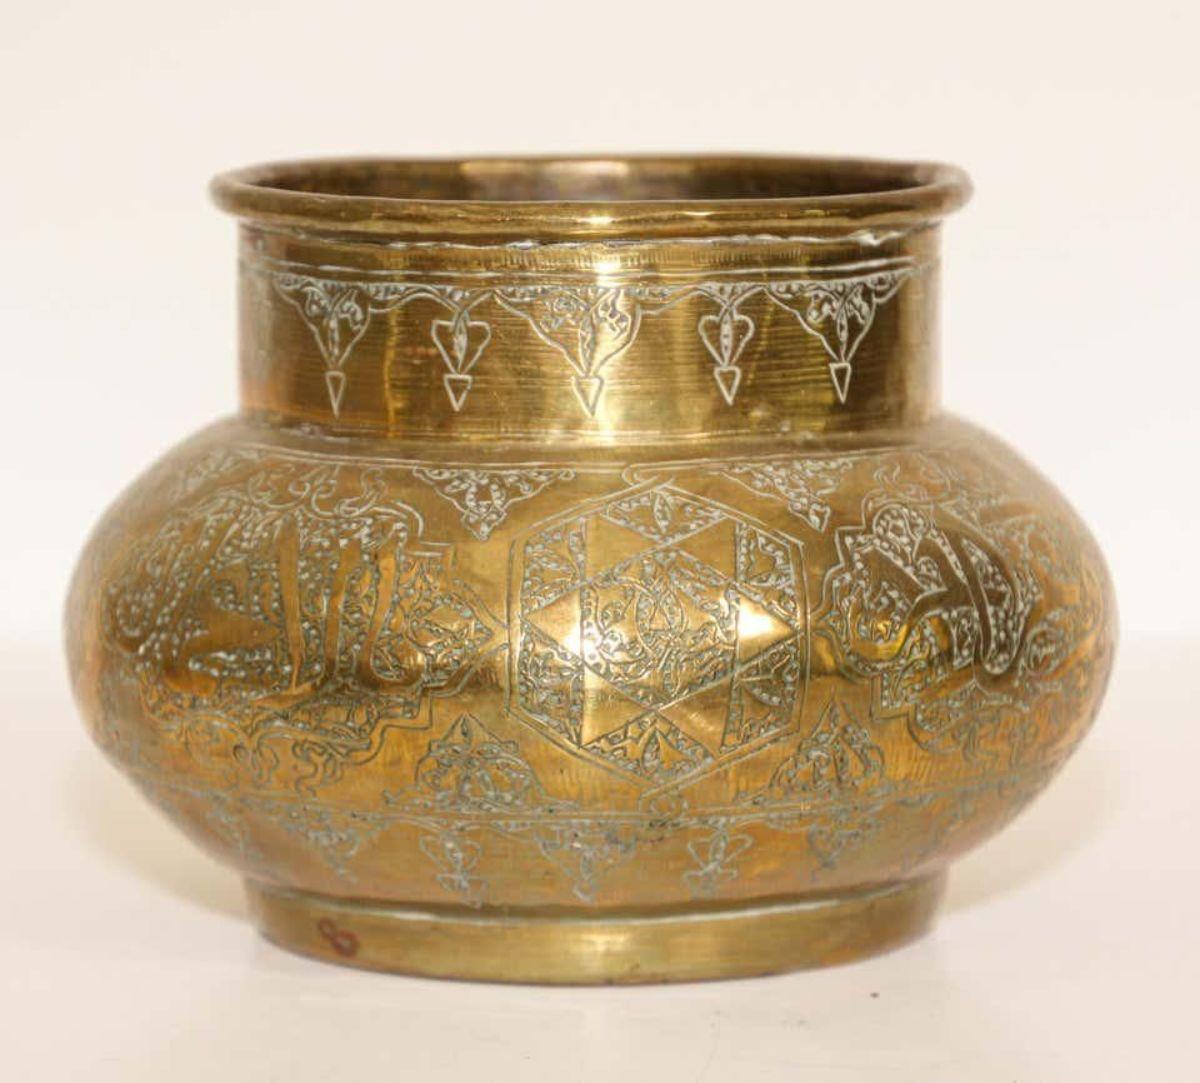 19th Century Antique Moorish Islamic Brass Bowl with Calligraphy Writing For Sale